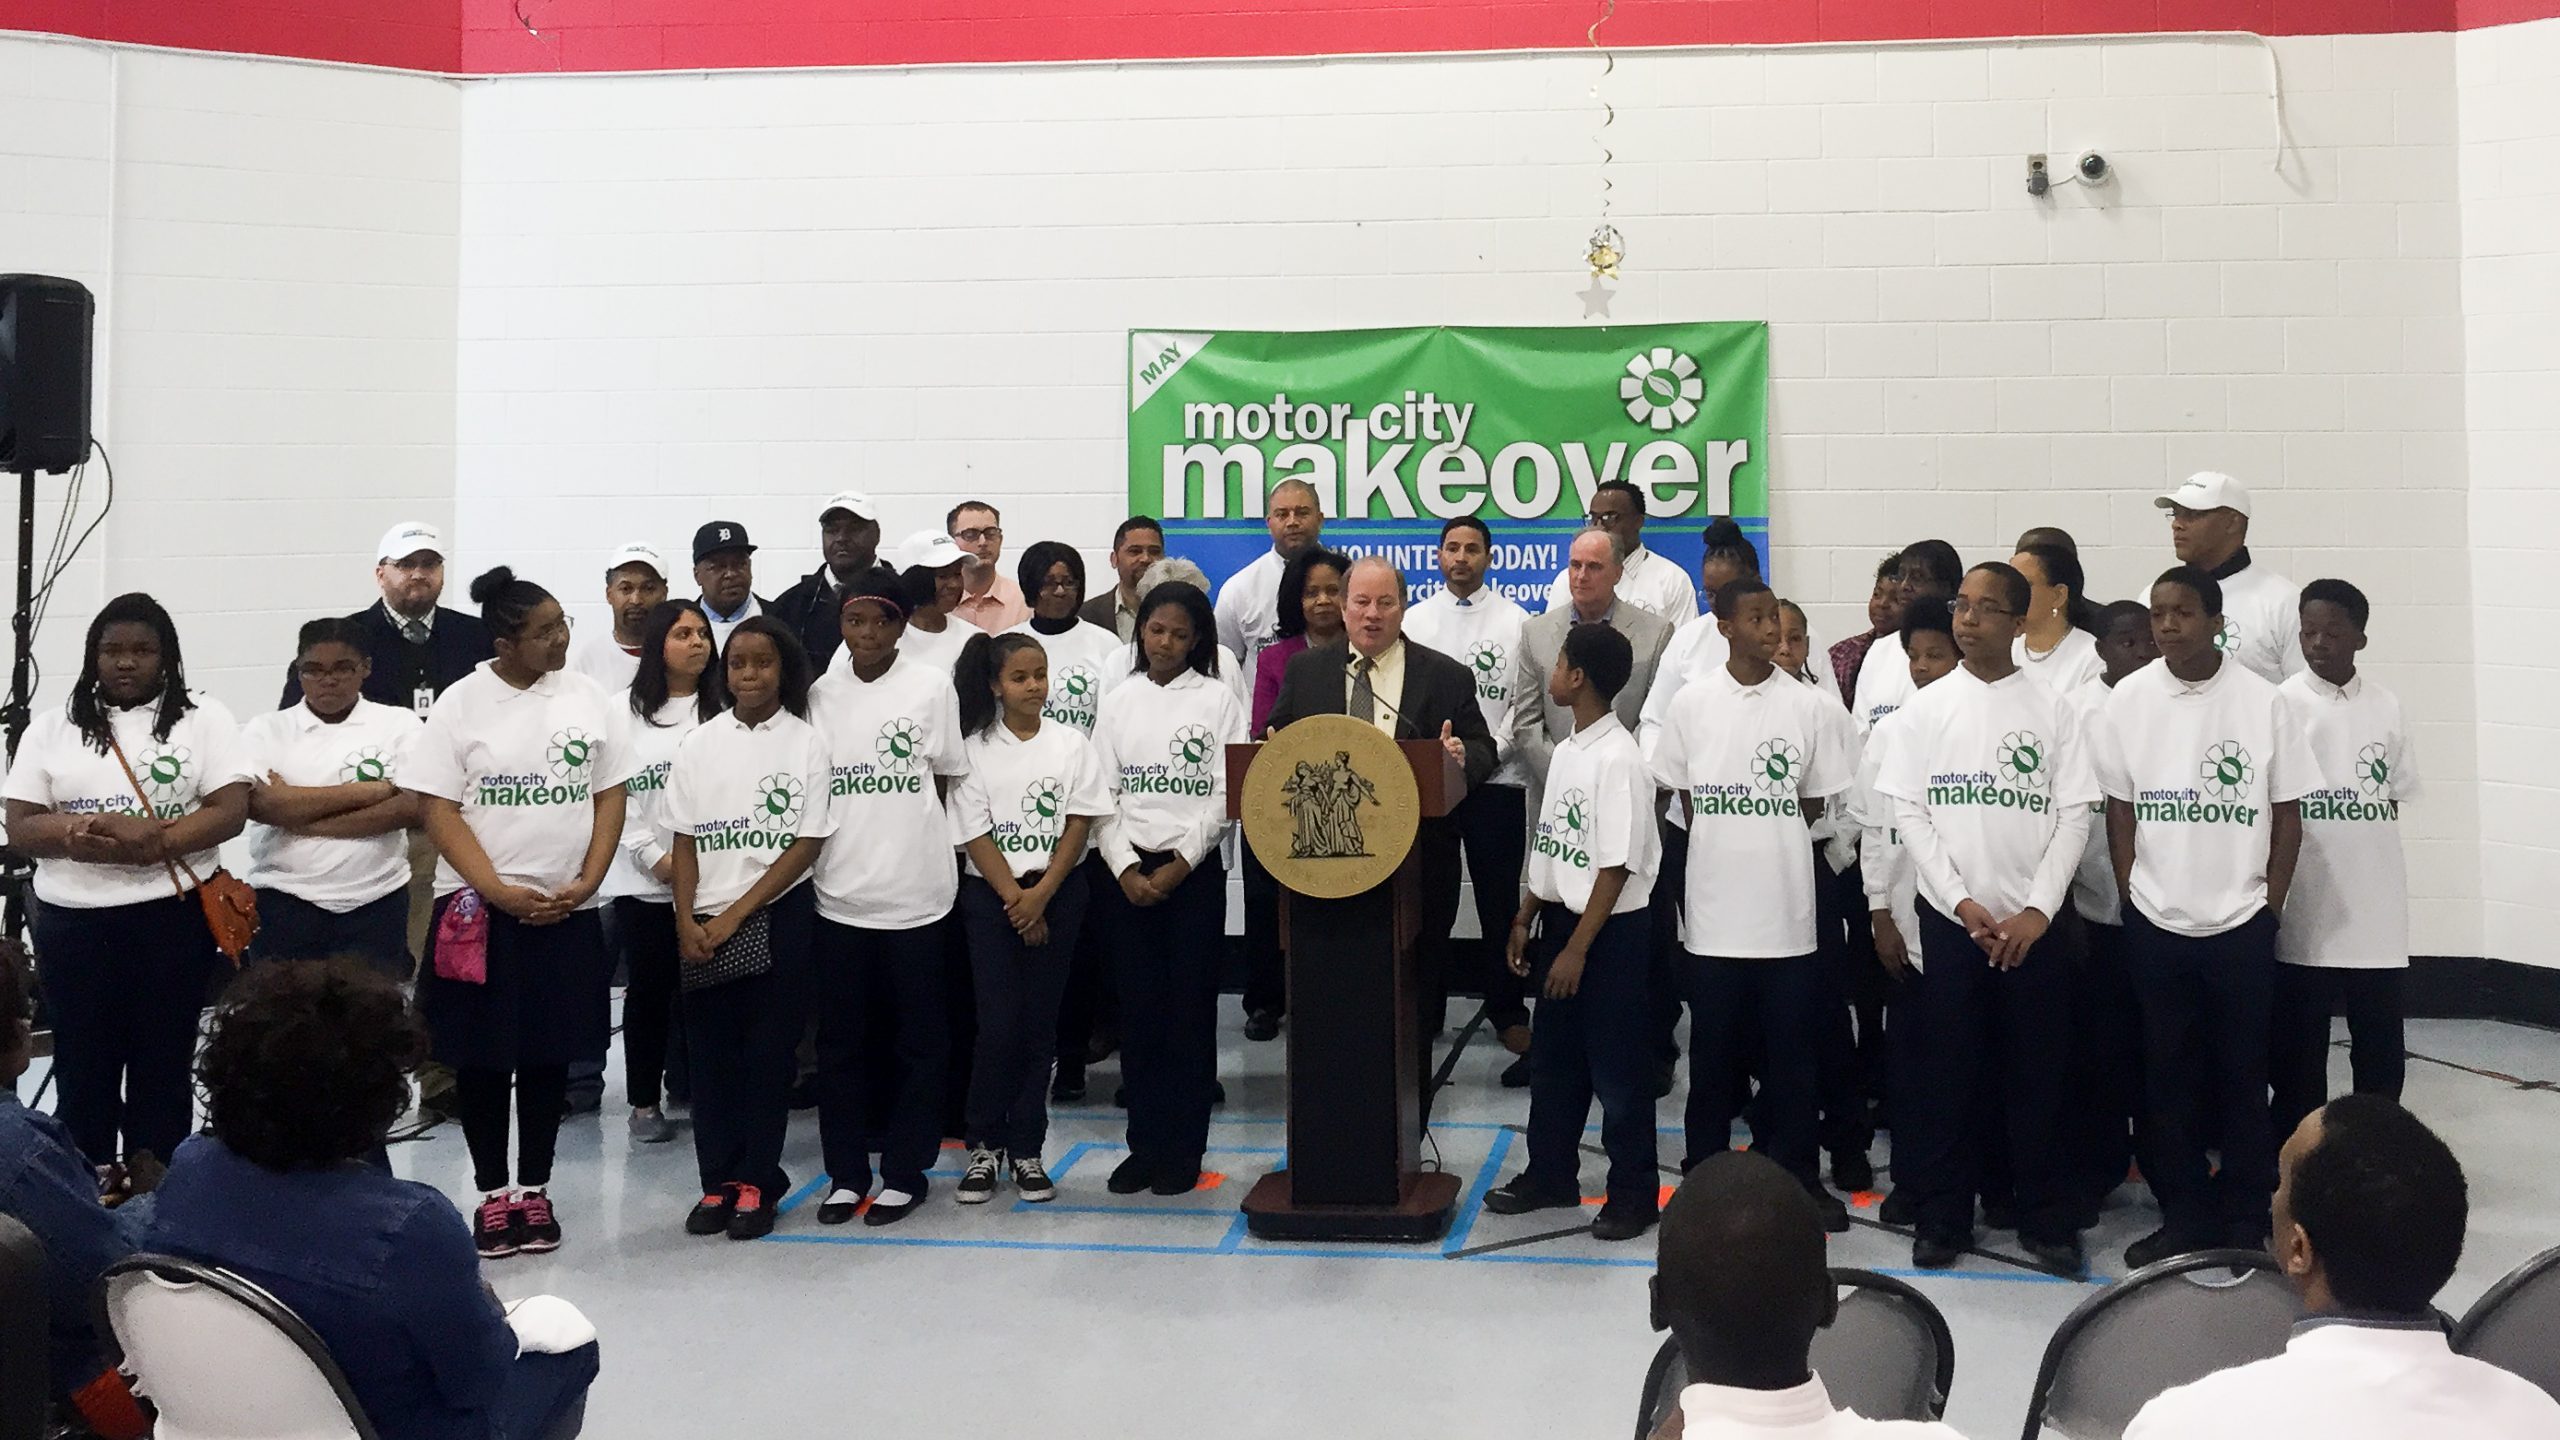 Motor City Makeover returns for citywide spring cleaning in Detroit